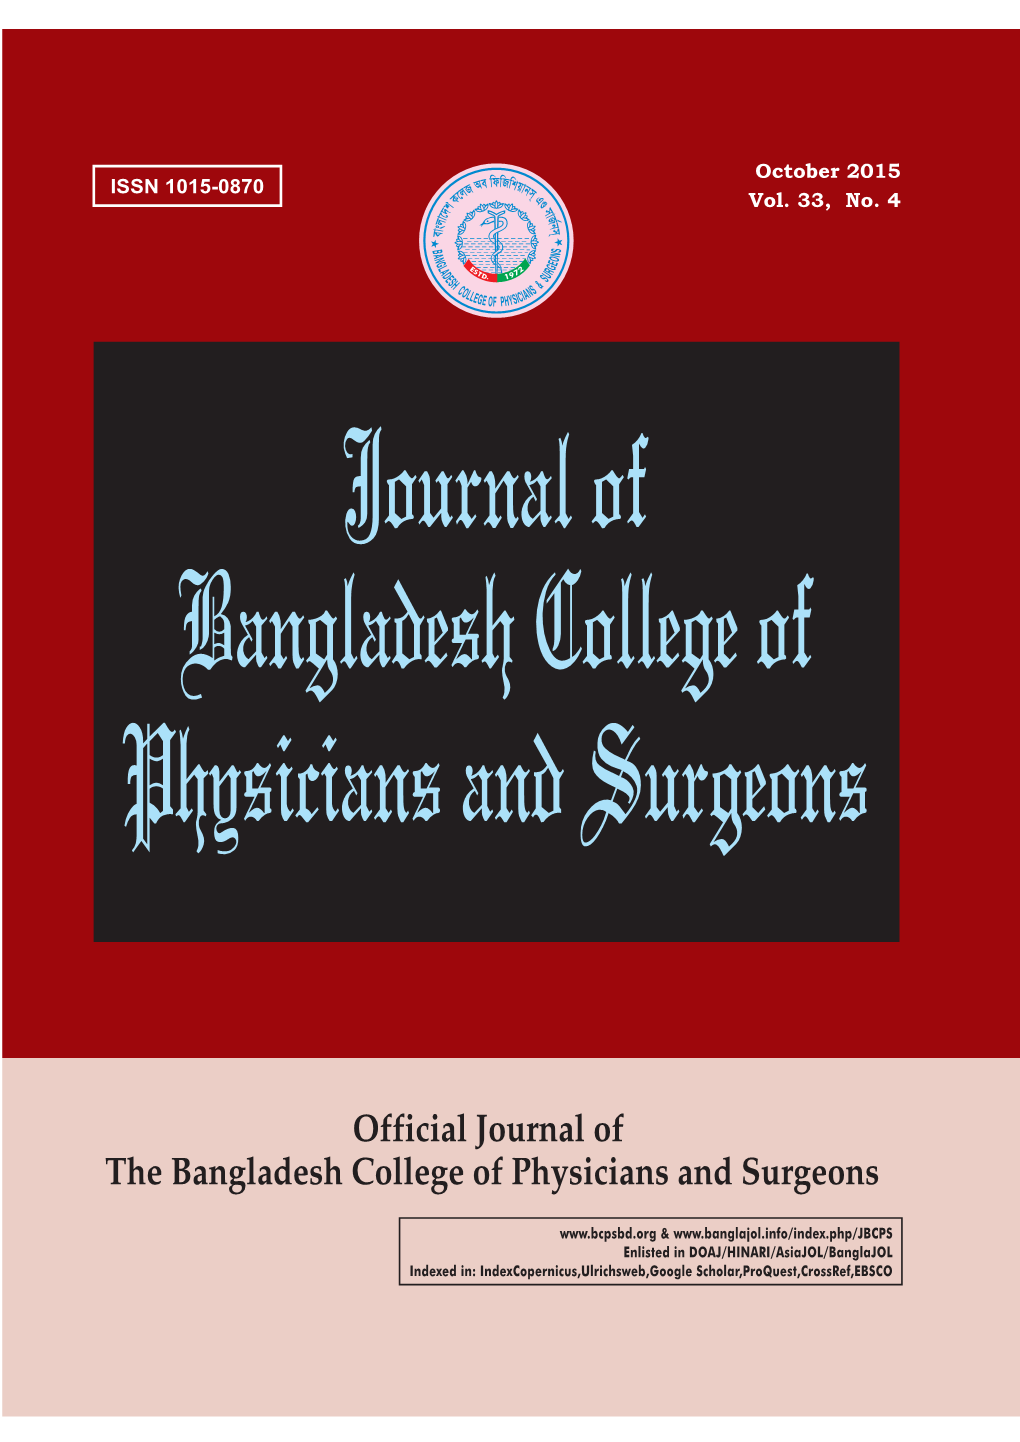 October 2015 Vol. 33, No. 4 JOURNAL of BANGLADESH COLLEGE of PHYSICIANS and SURGEONS Vol